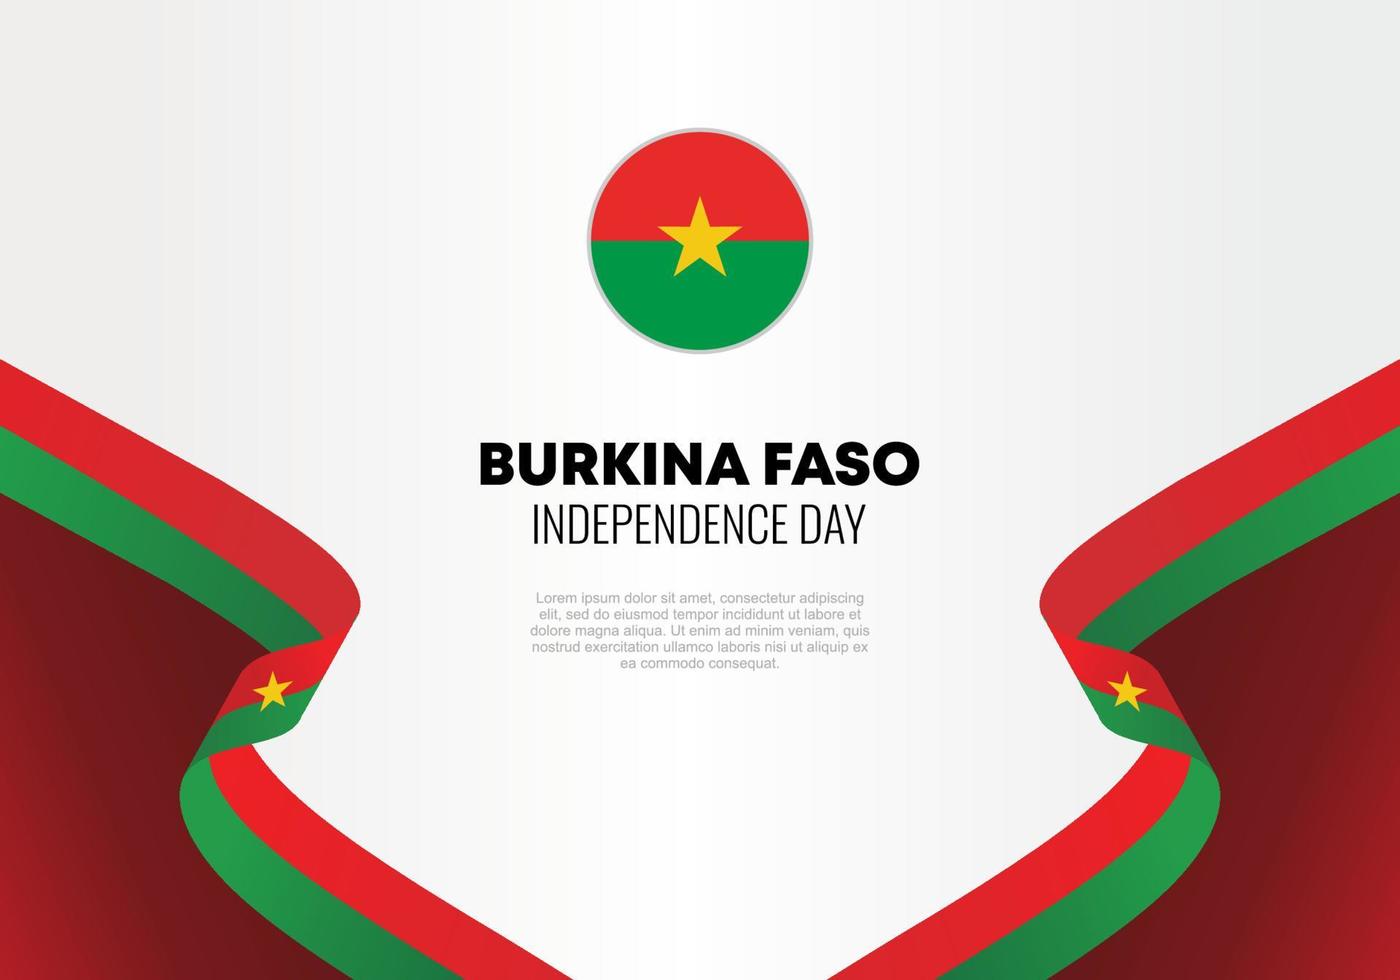 Burkina Faso independence day national celebration on August 5. vector